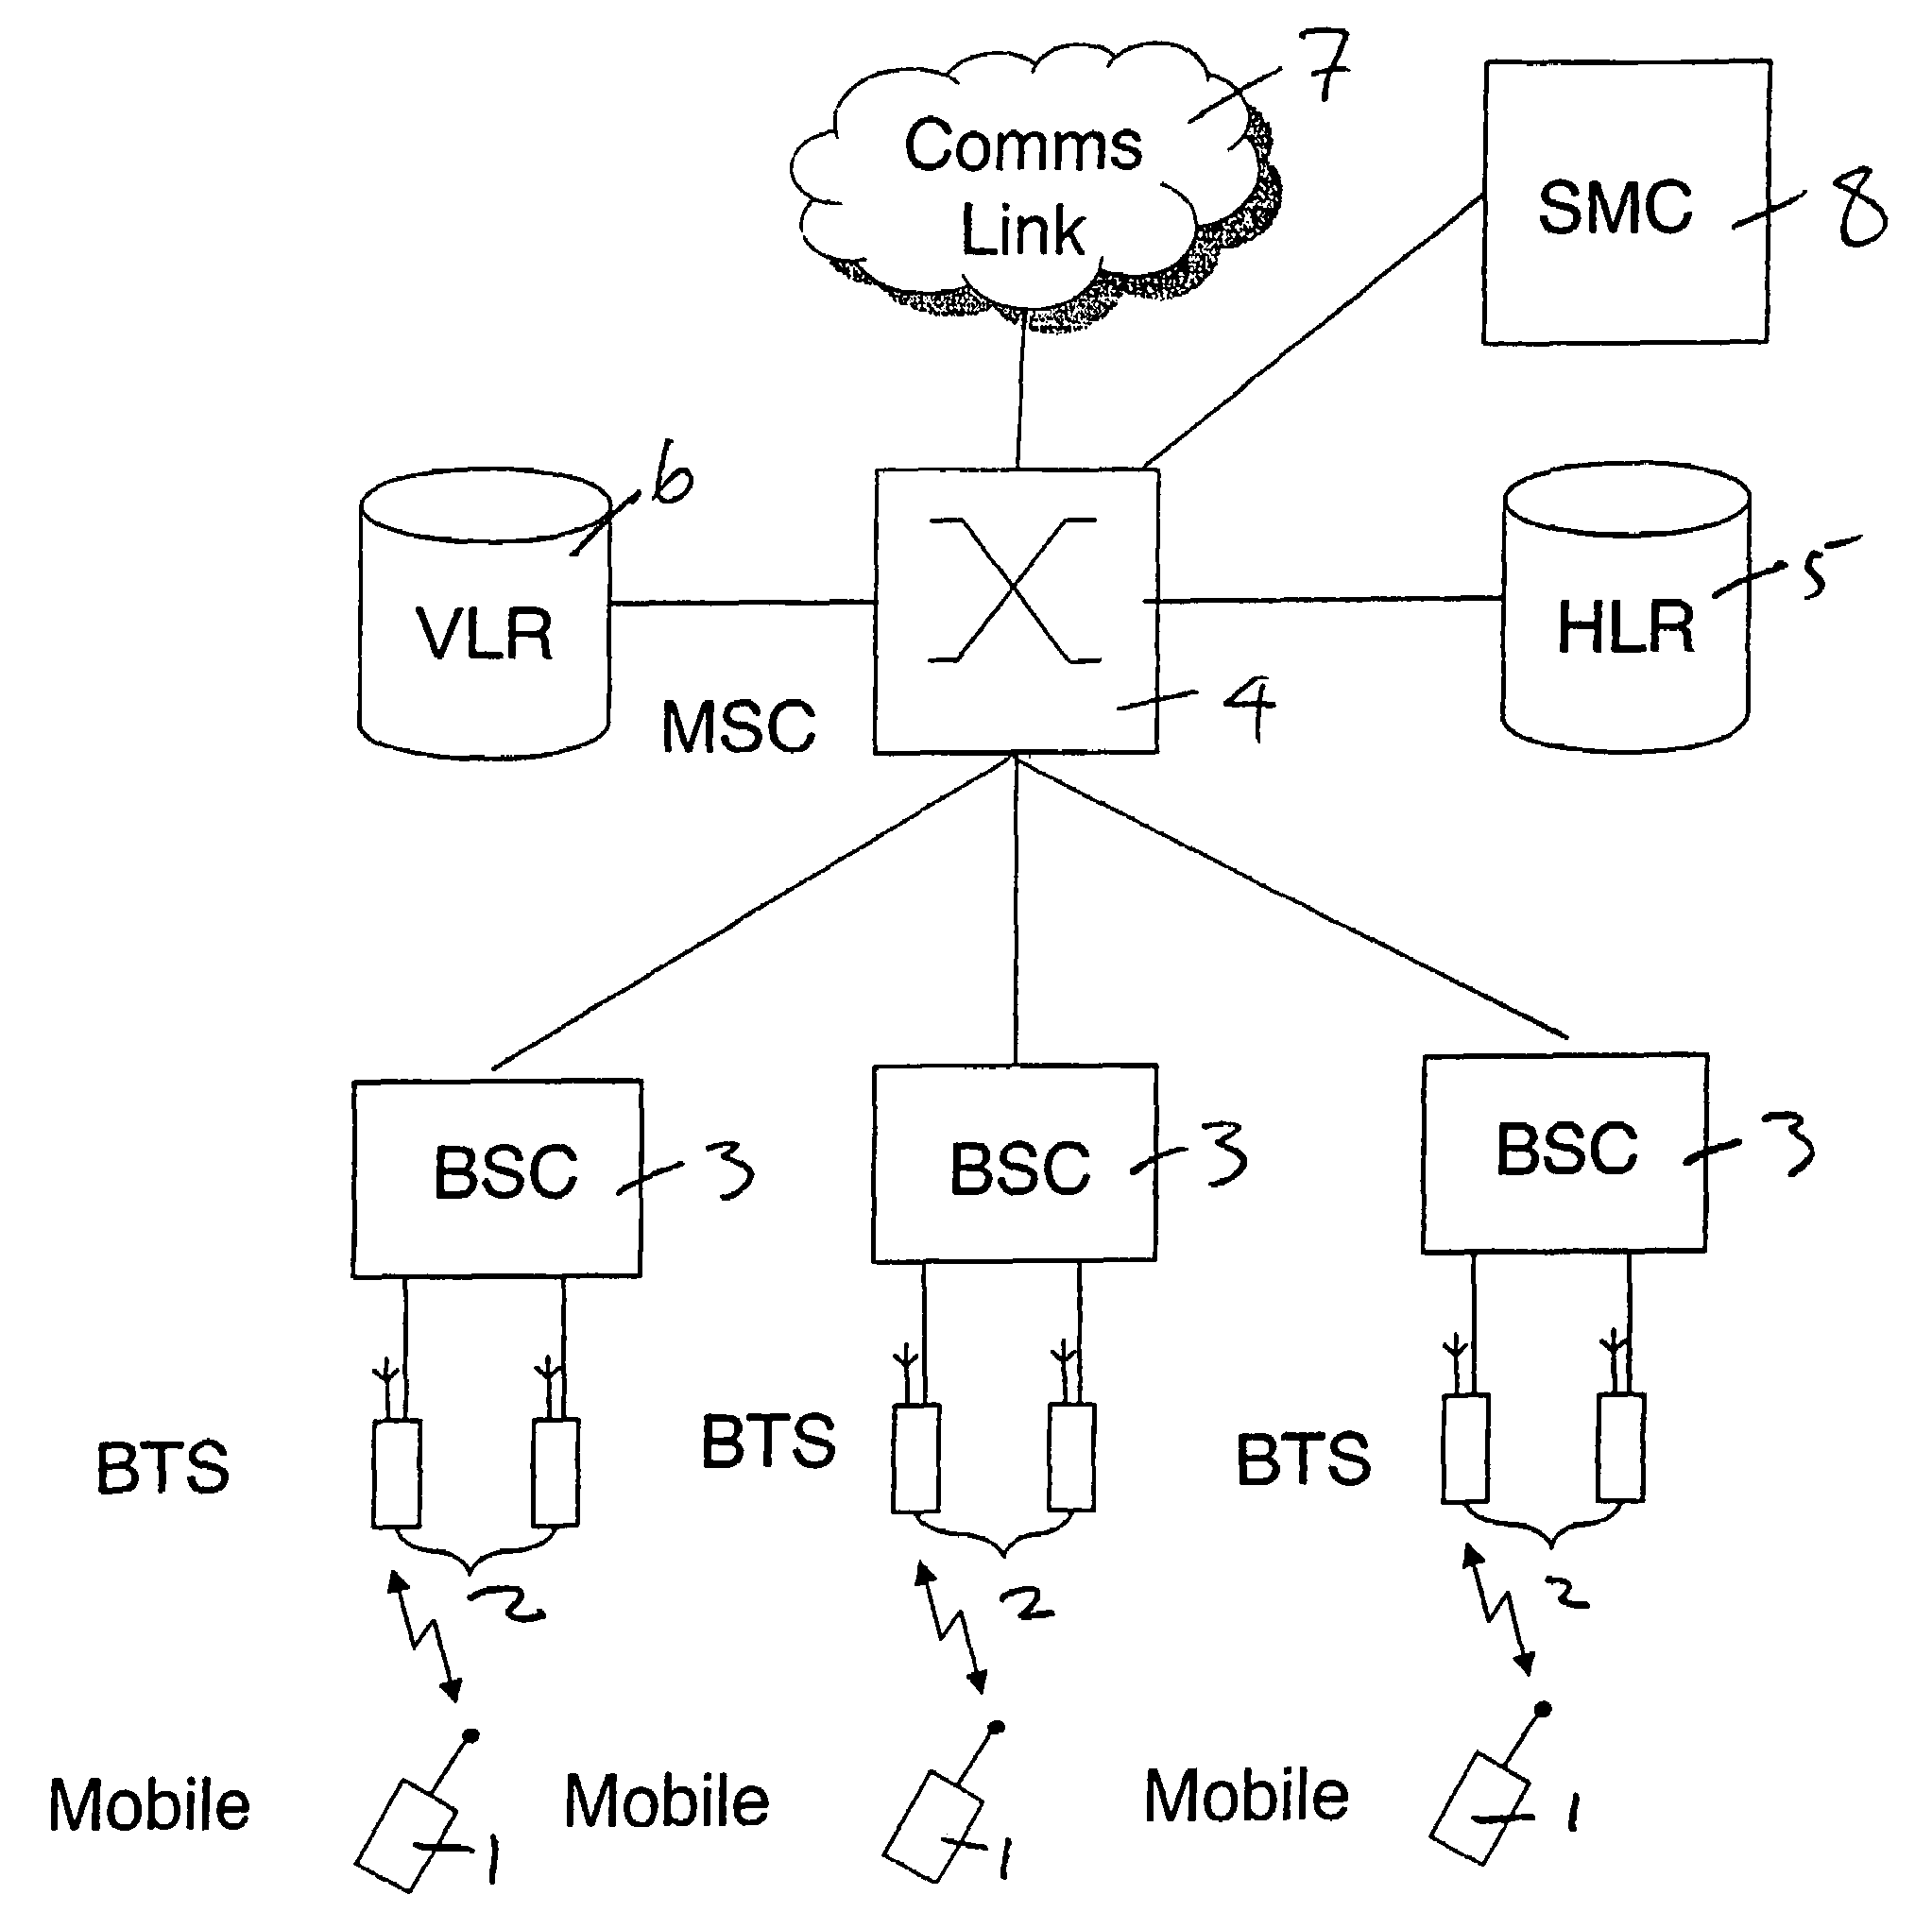 Provision of group services in a telecommunications network